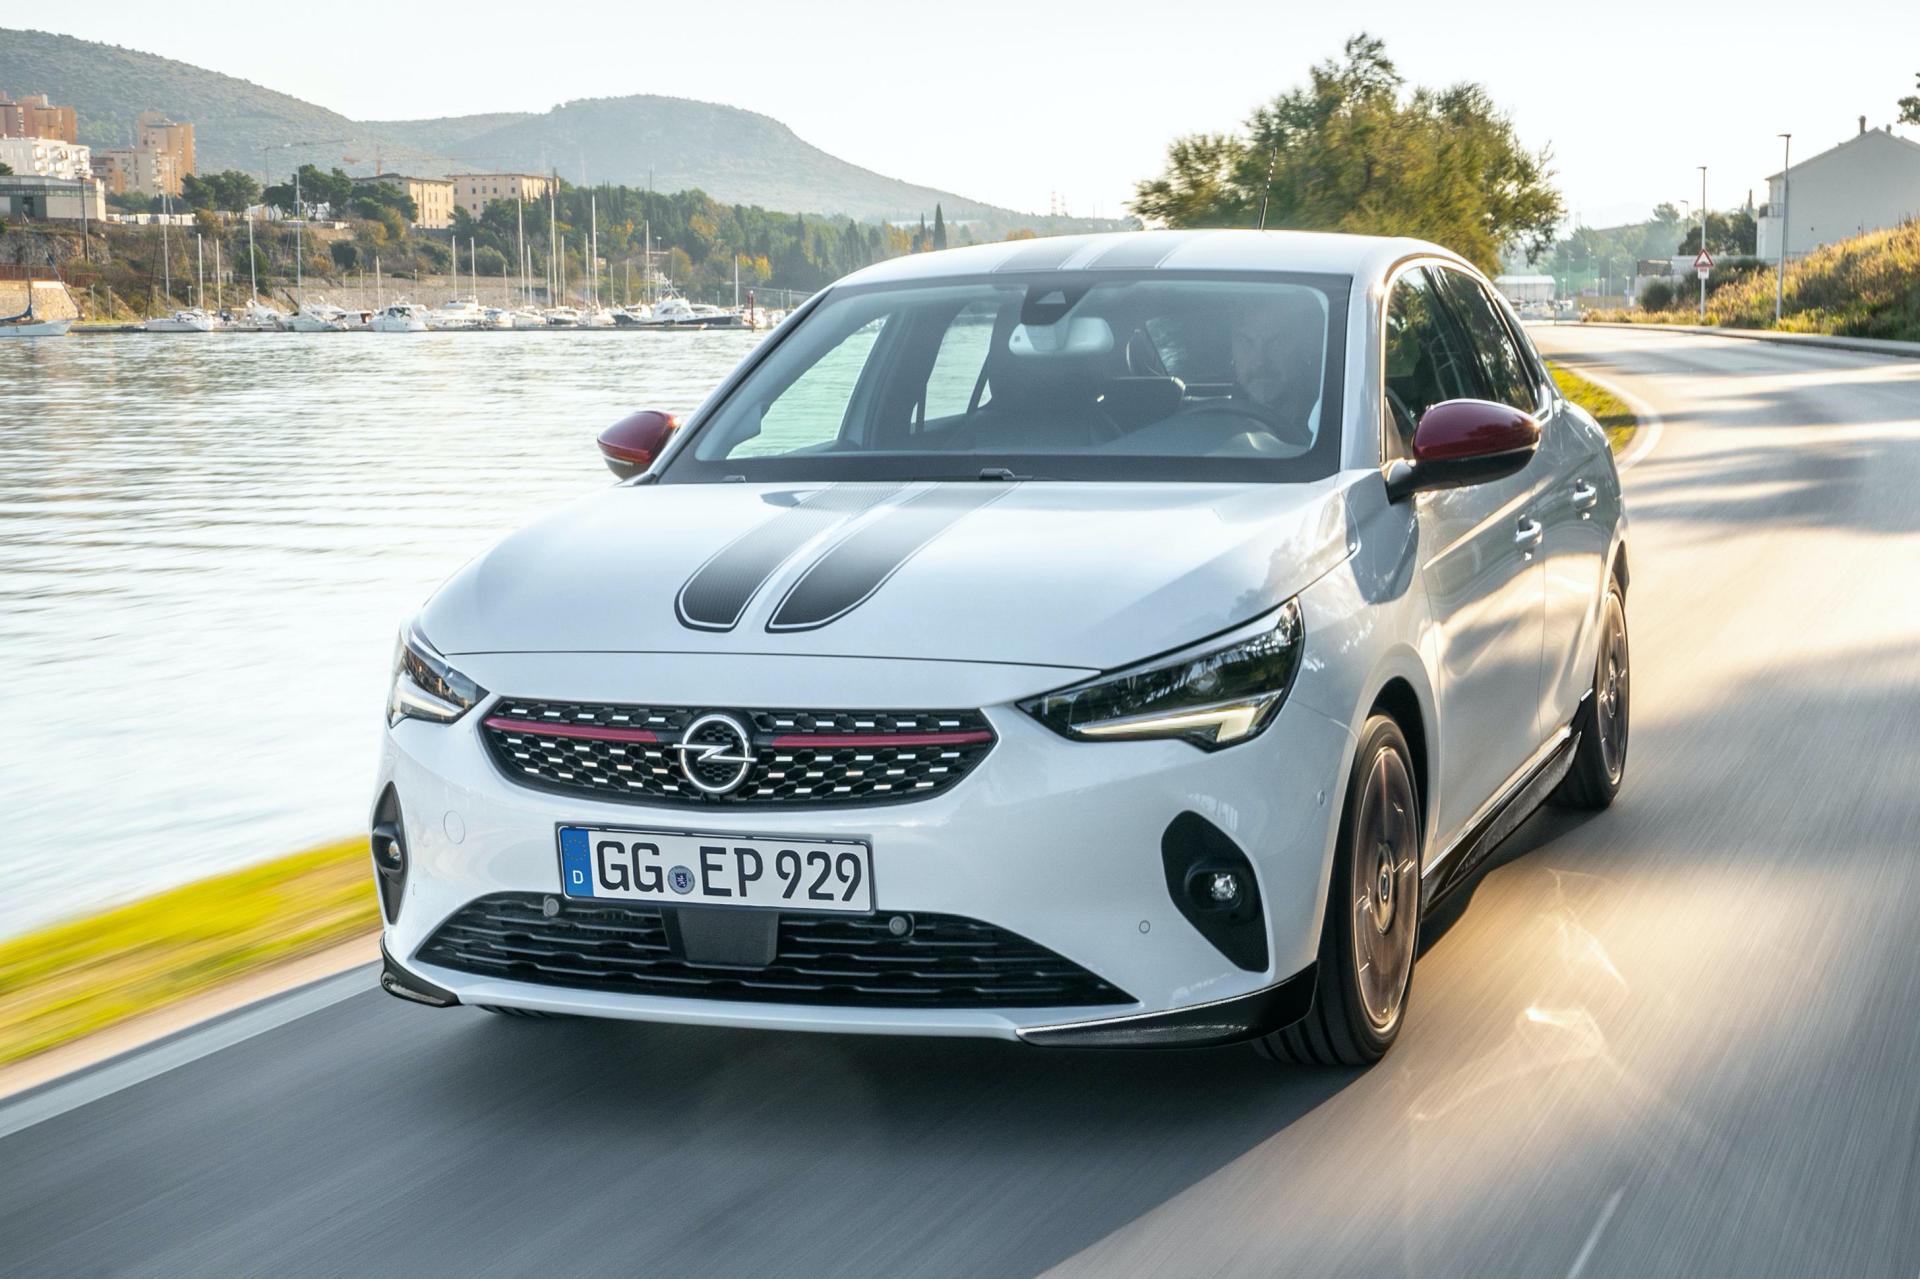 experimenteel Tot Zo veel 2020 Opel Corsa Offers More Personalization Options Than Ever Before |  Carscoops